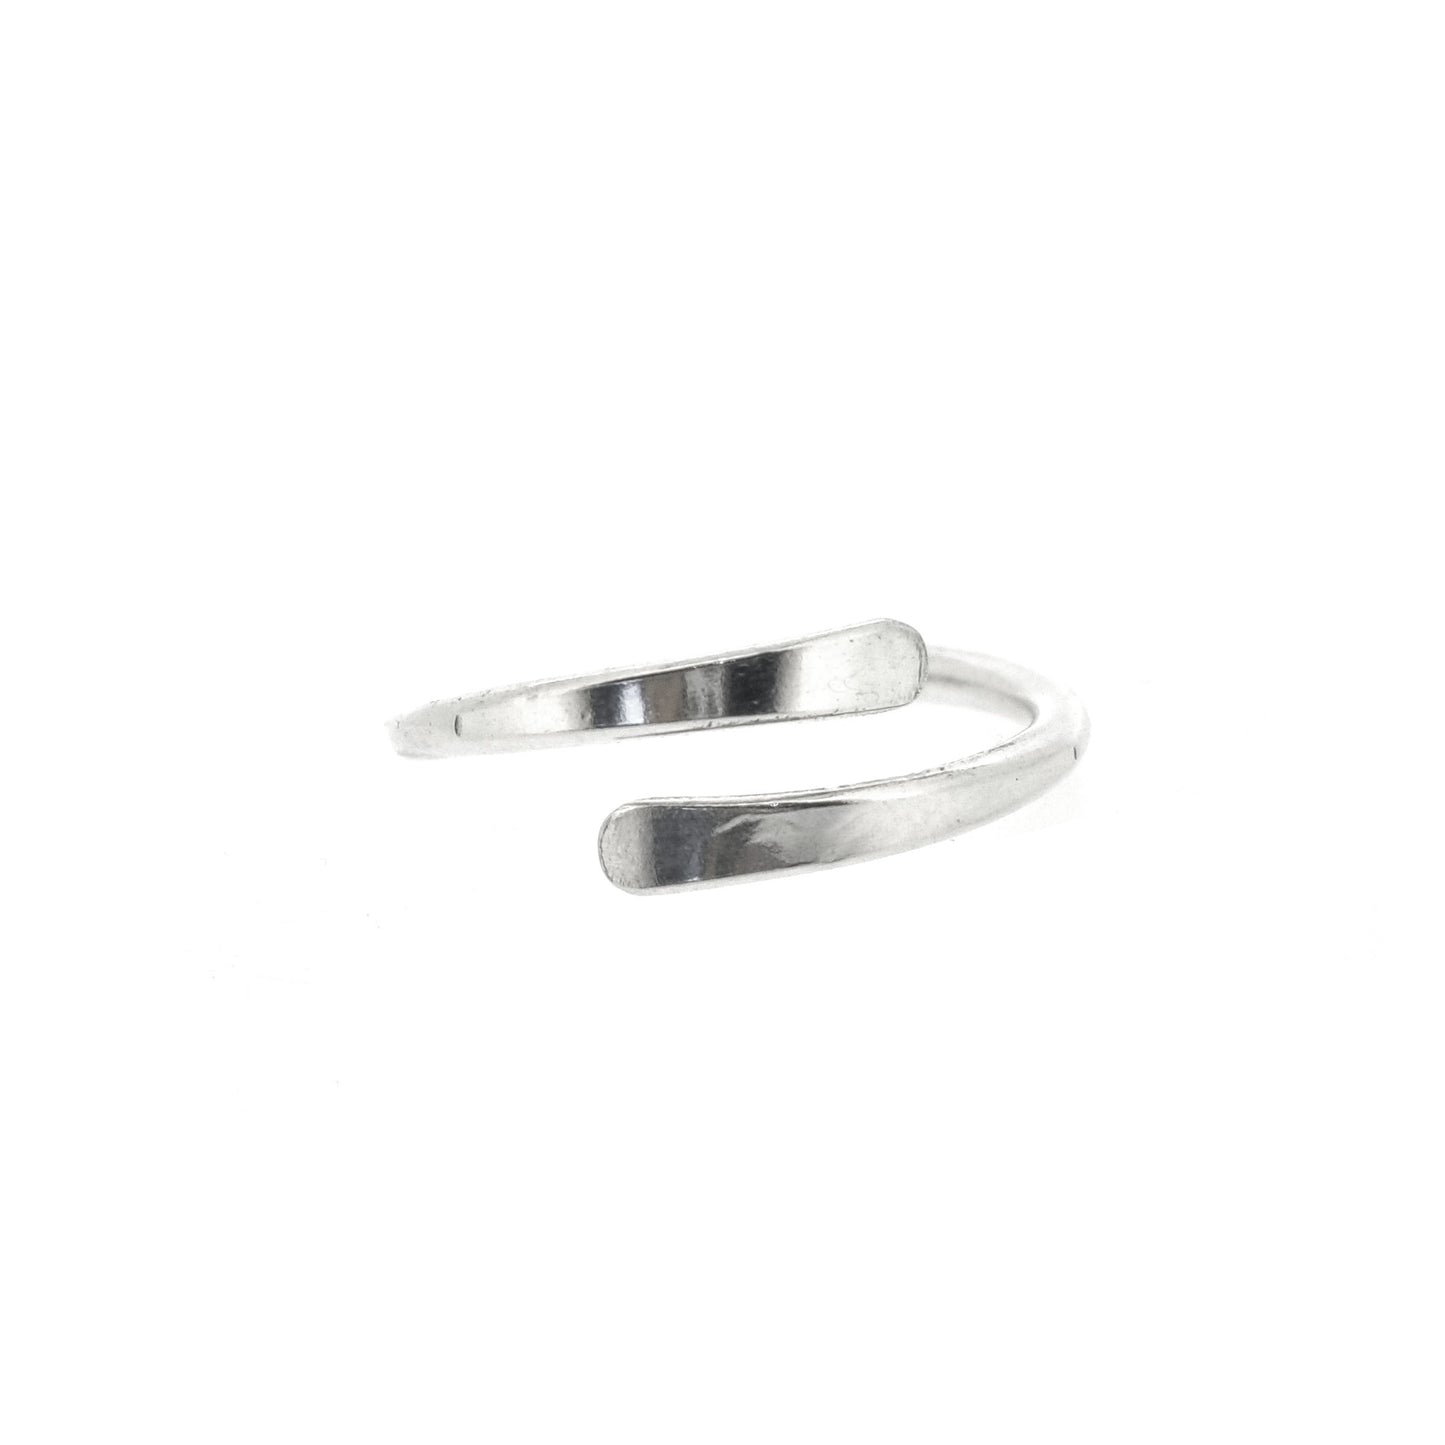 Silver cross over ring with flared & flattened ends.